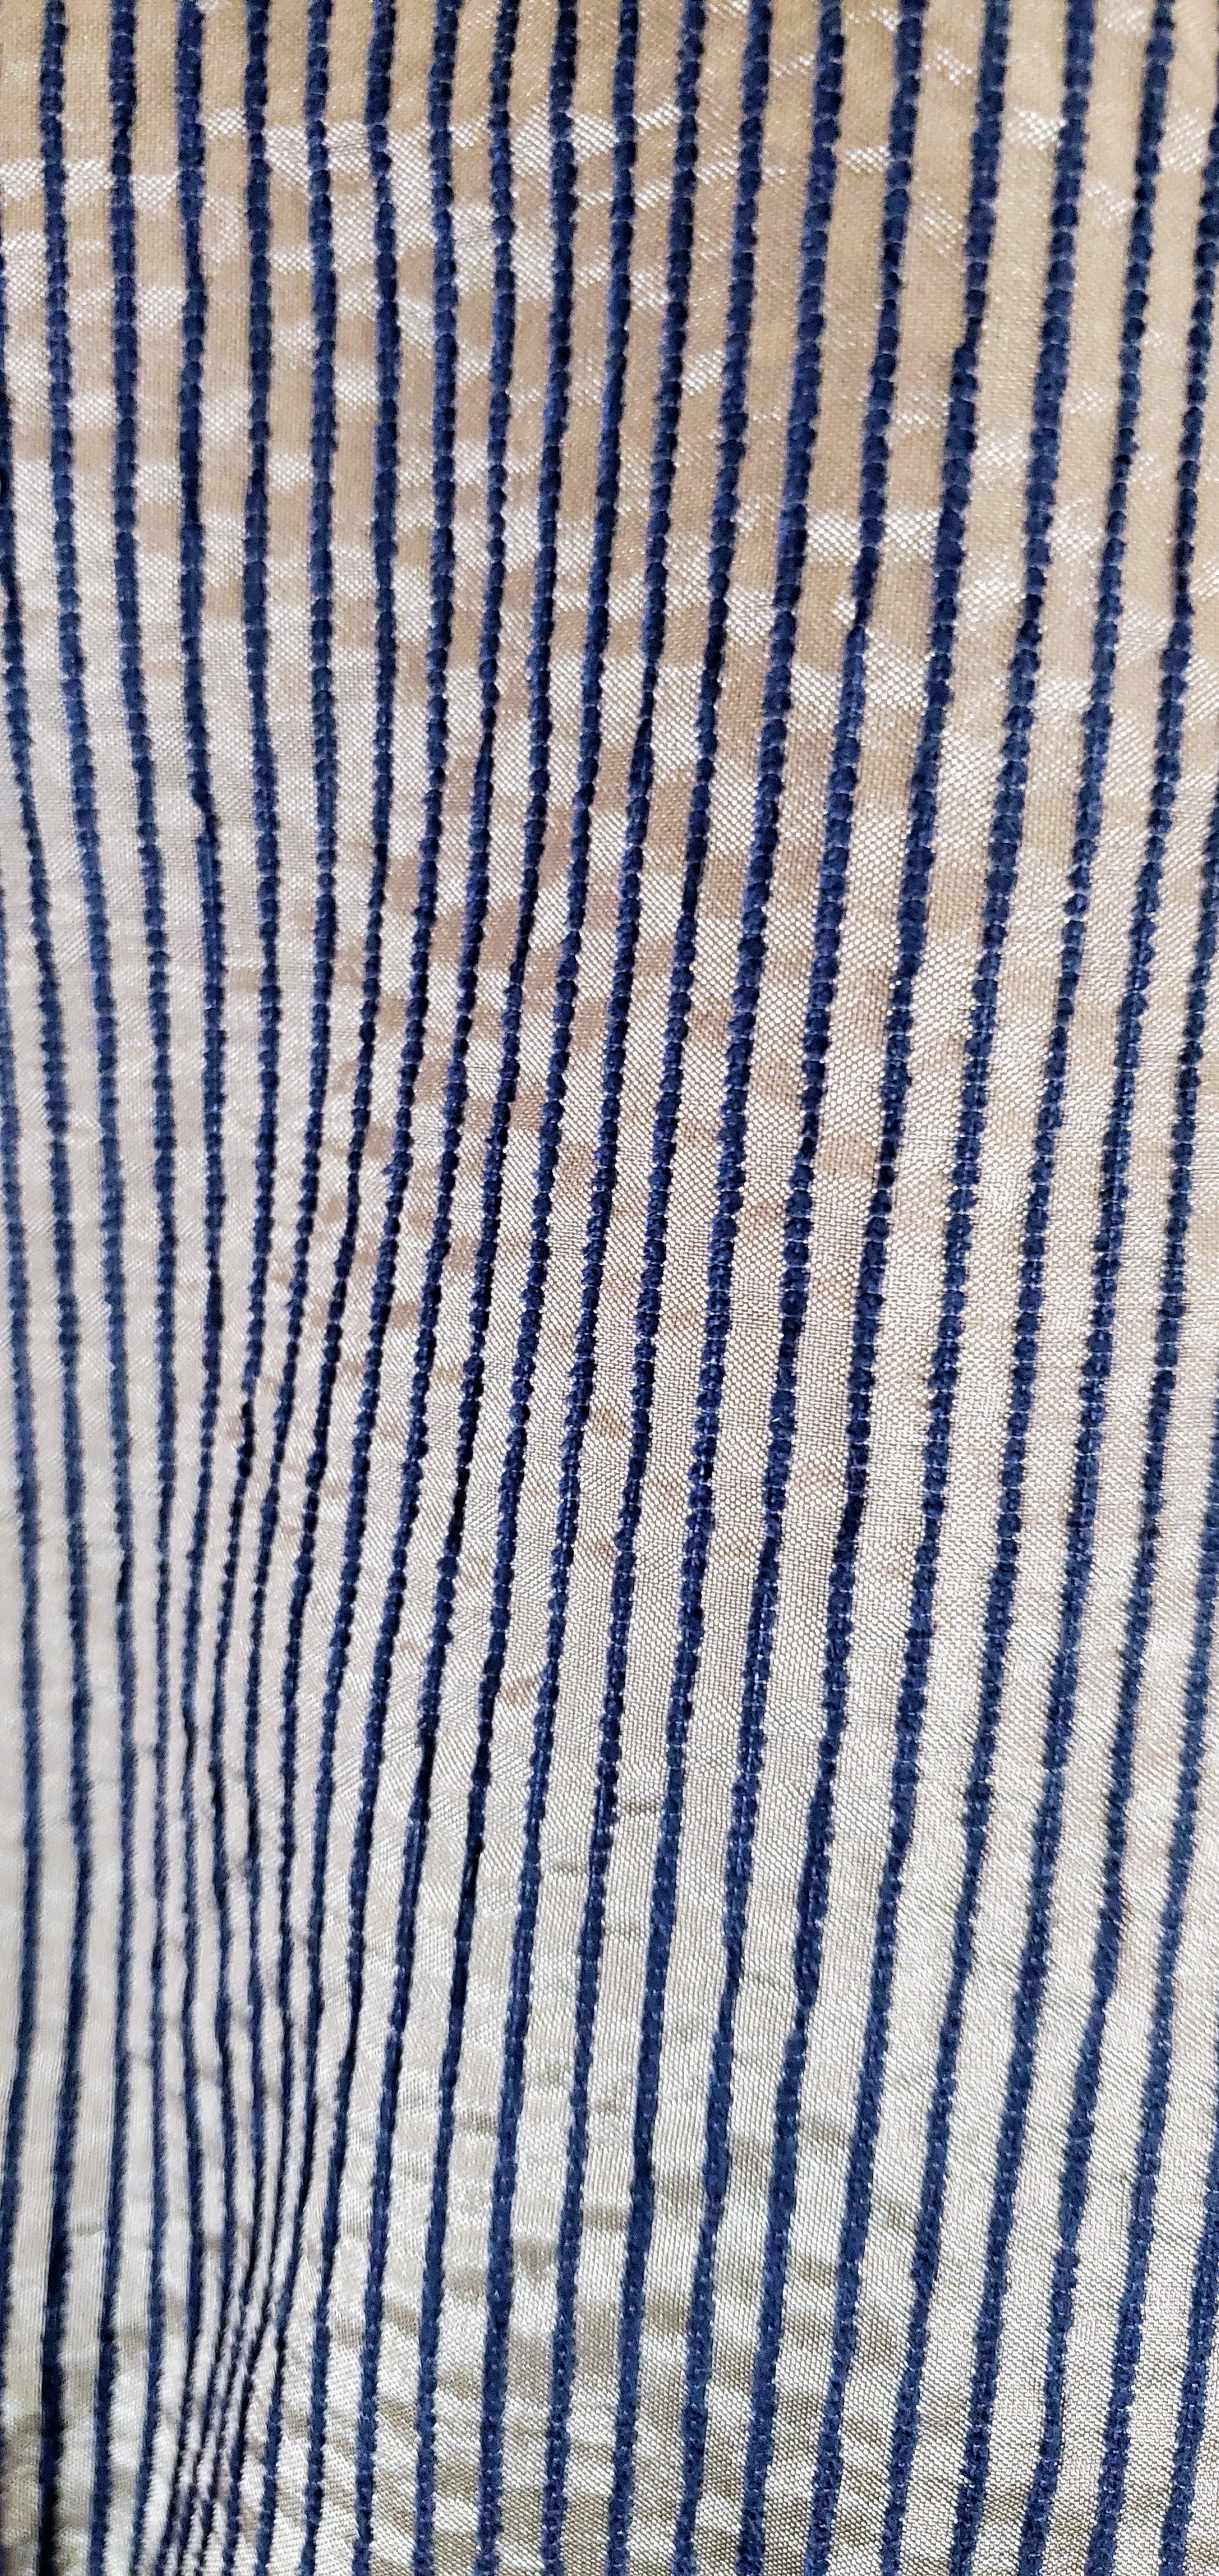 Close up view of Menswear Inspired pinstripe Bomber Jacket bodice fabric